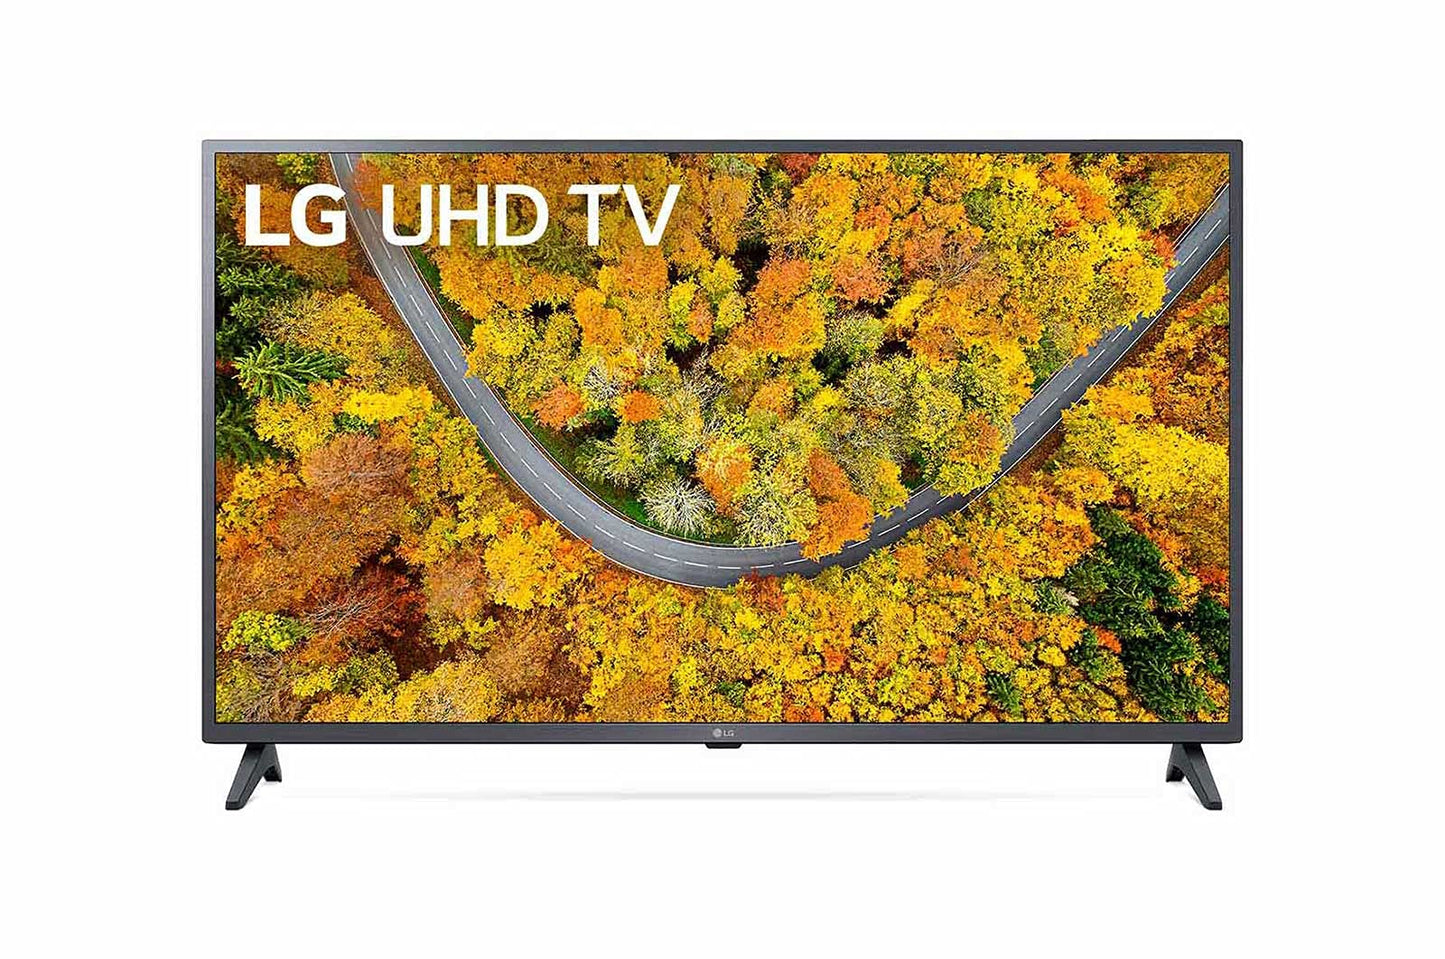 LG 43UP7550 43 Inch 4K with WebOS Smart Tv AI ThinQ with True Cinema Experience Size L x W x H 105 x 65 x 15 cm 1 Year Warranty., Black, Large